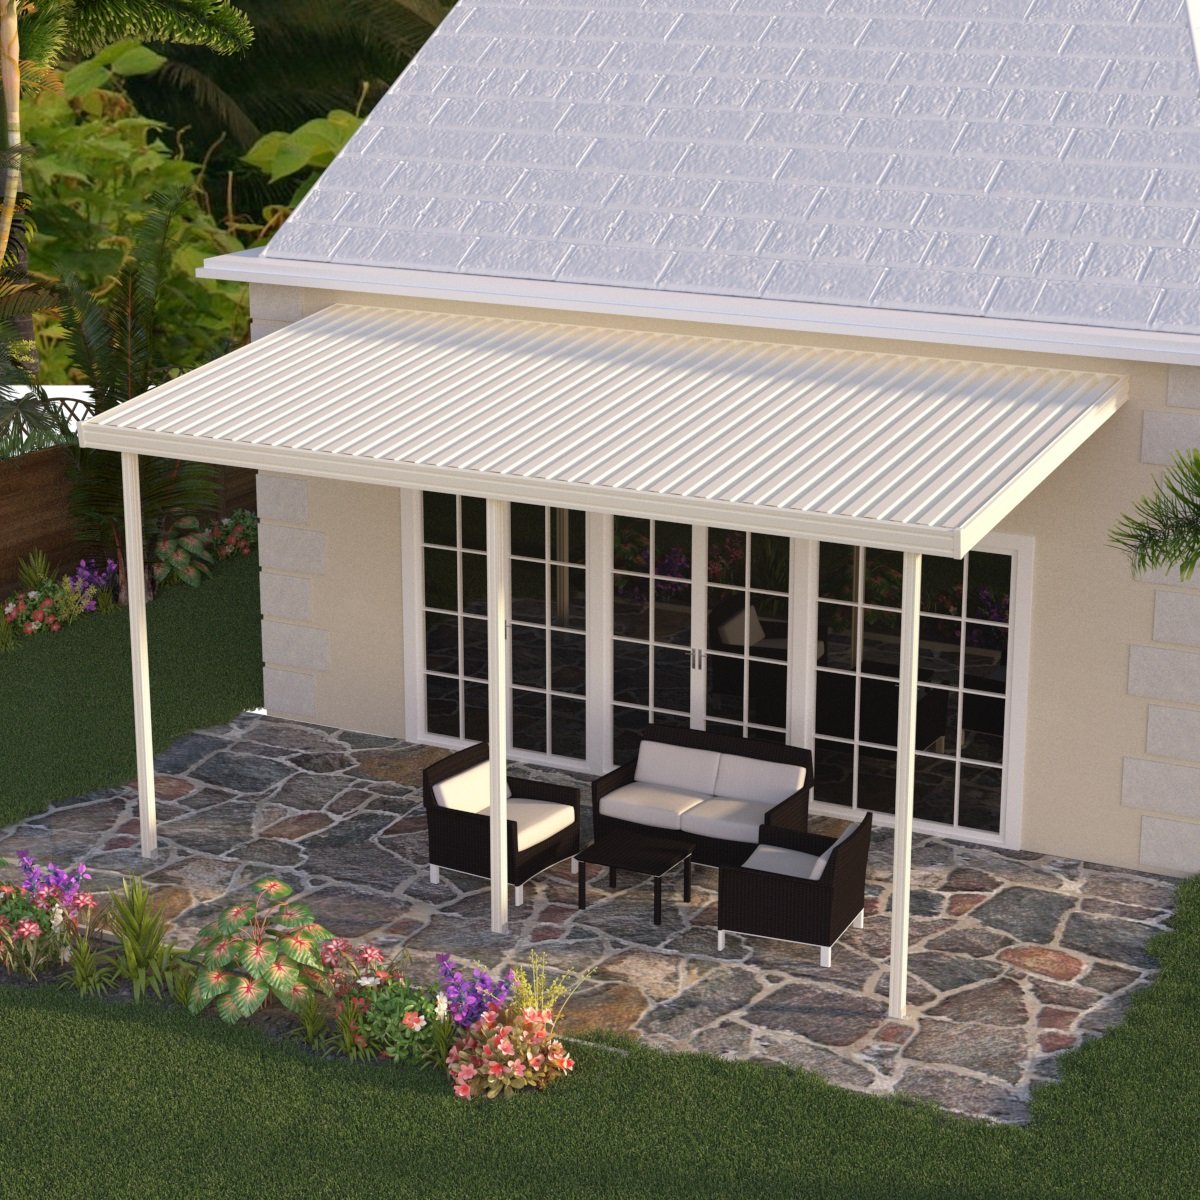 08 ft. Deep x 20 ft. Wide Ivory Attached Aluminum Patio Cover -3 Posts - (10lb Low Snow Area)